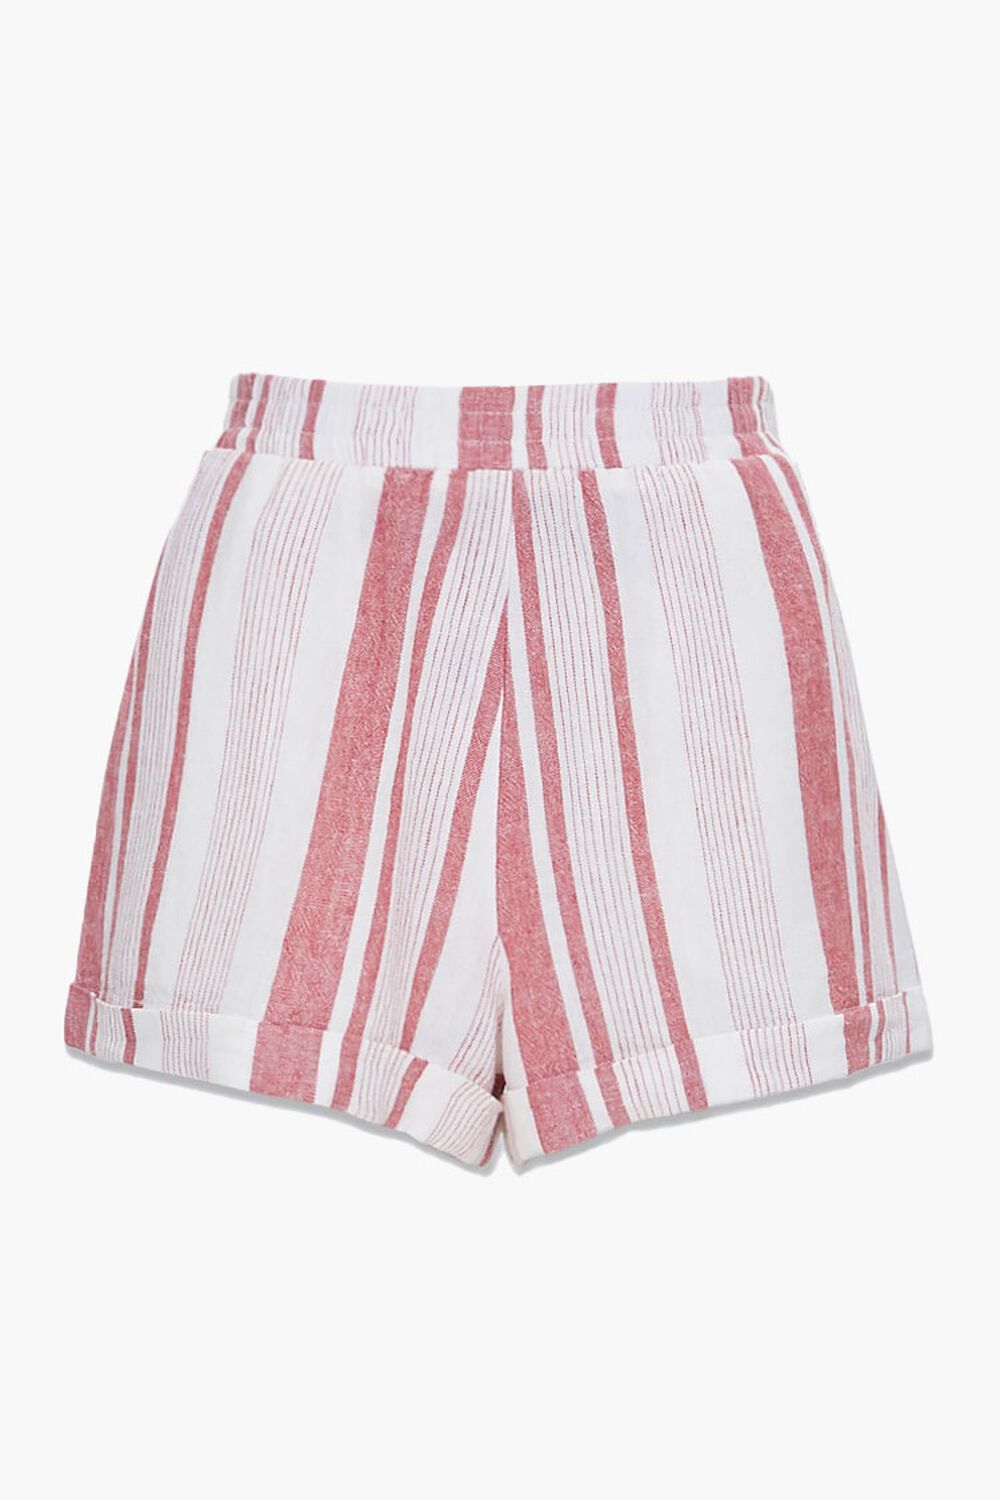 WHITE/RED Striped Linen-Blend Shorts, image 1